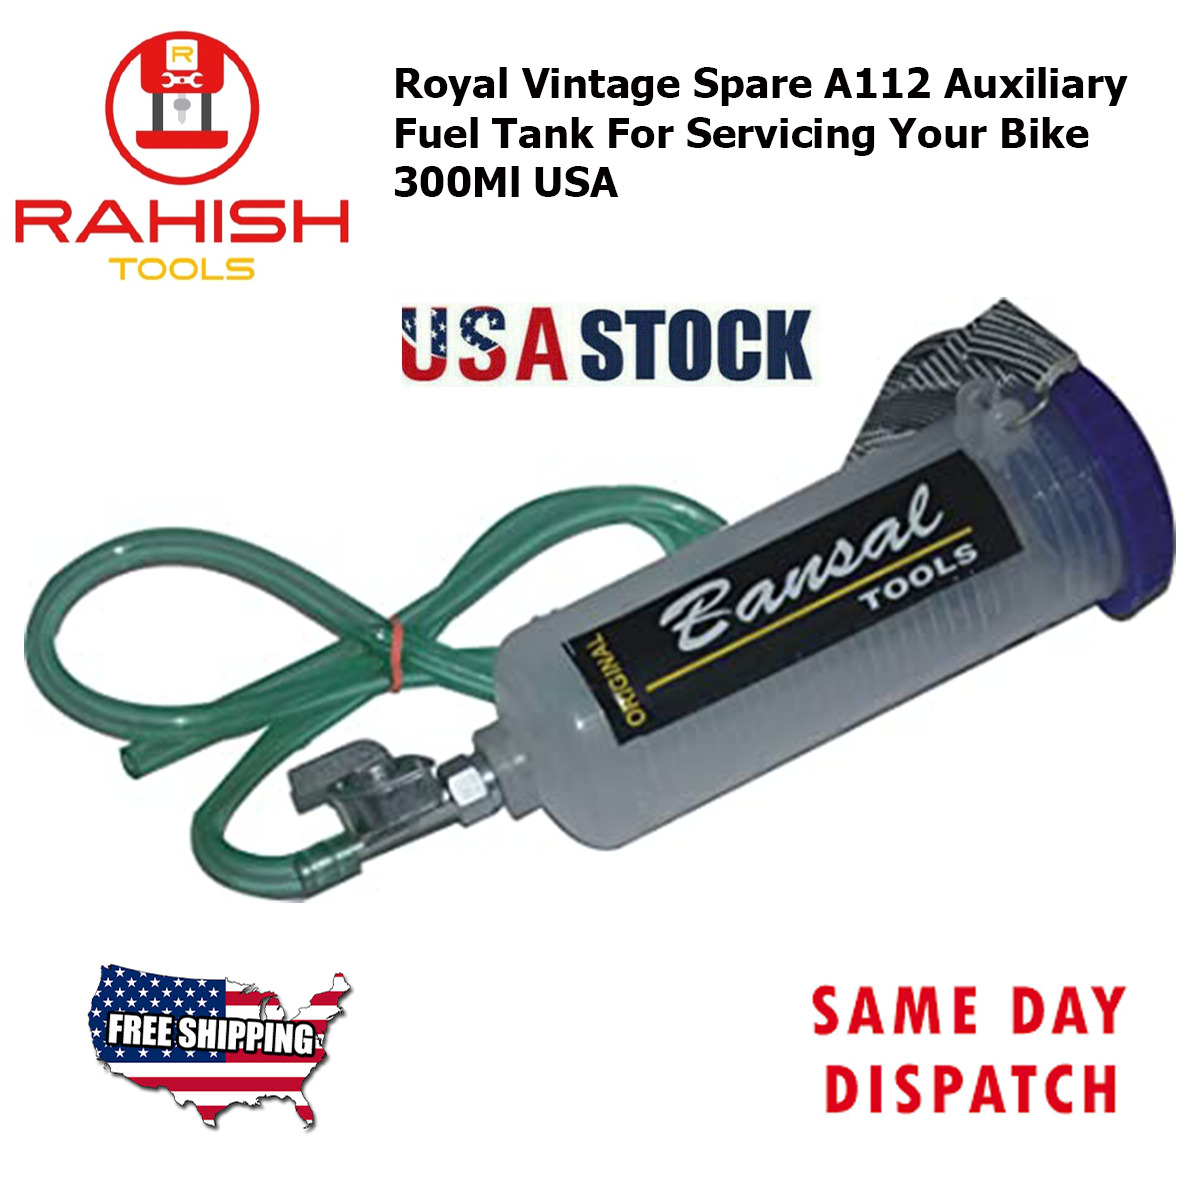 Royal Vintage Spare A112 Auxiliary Fuel Tank For Servicing Your Bike 300Ml USA